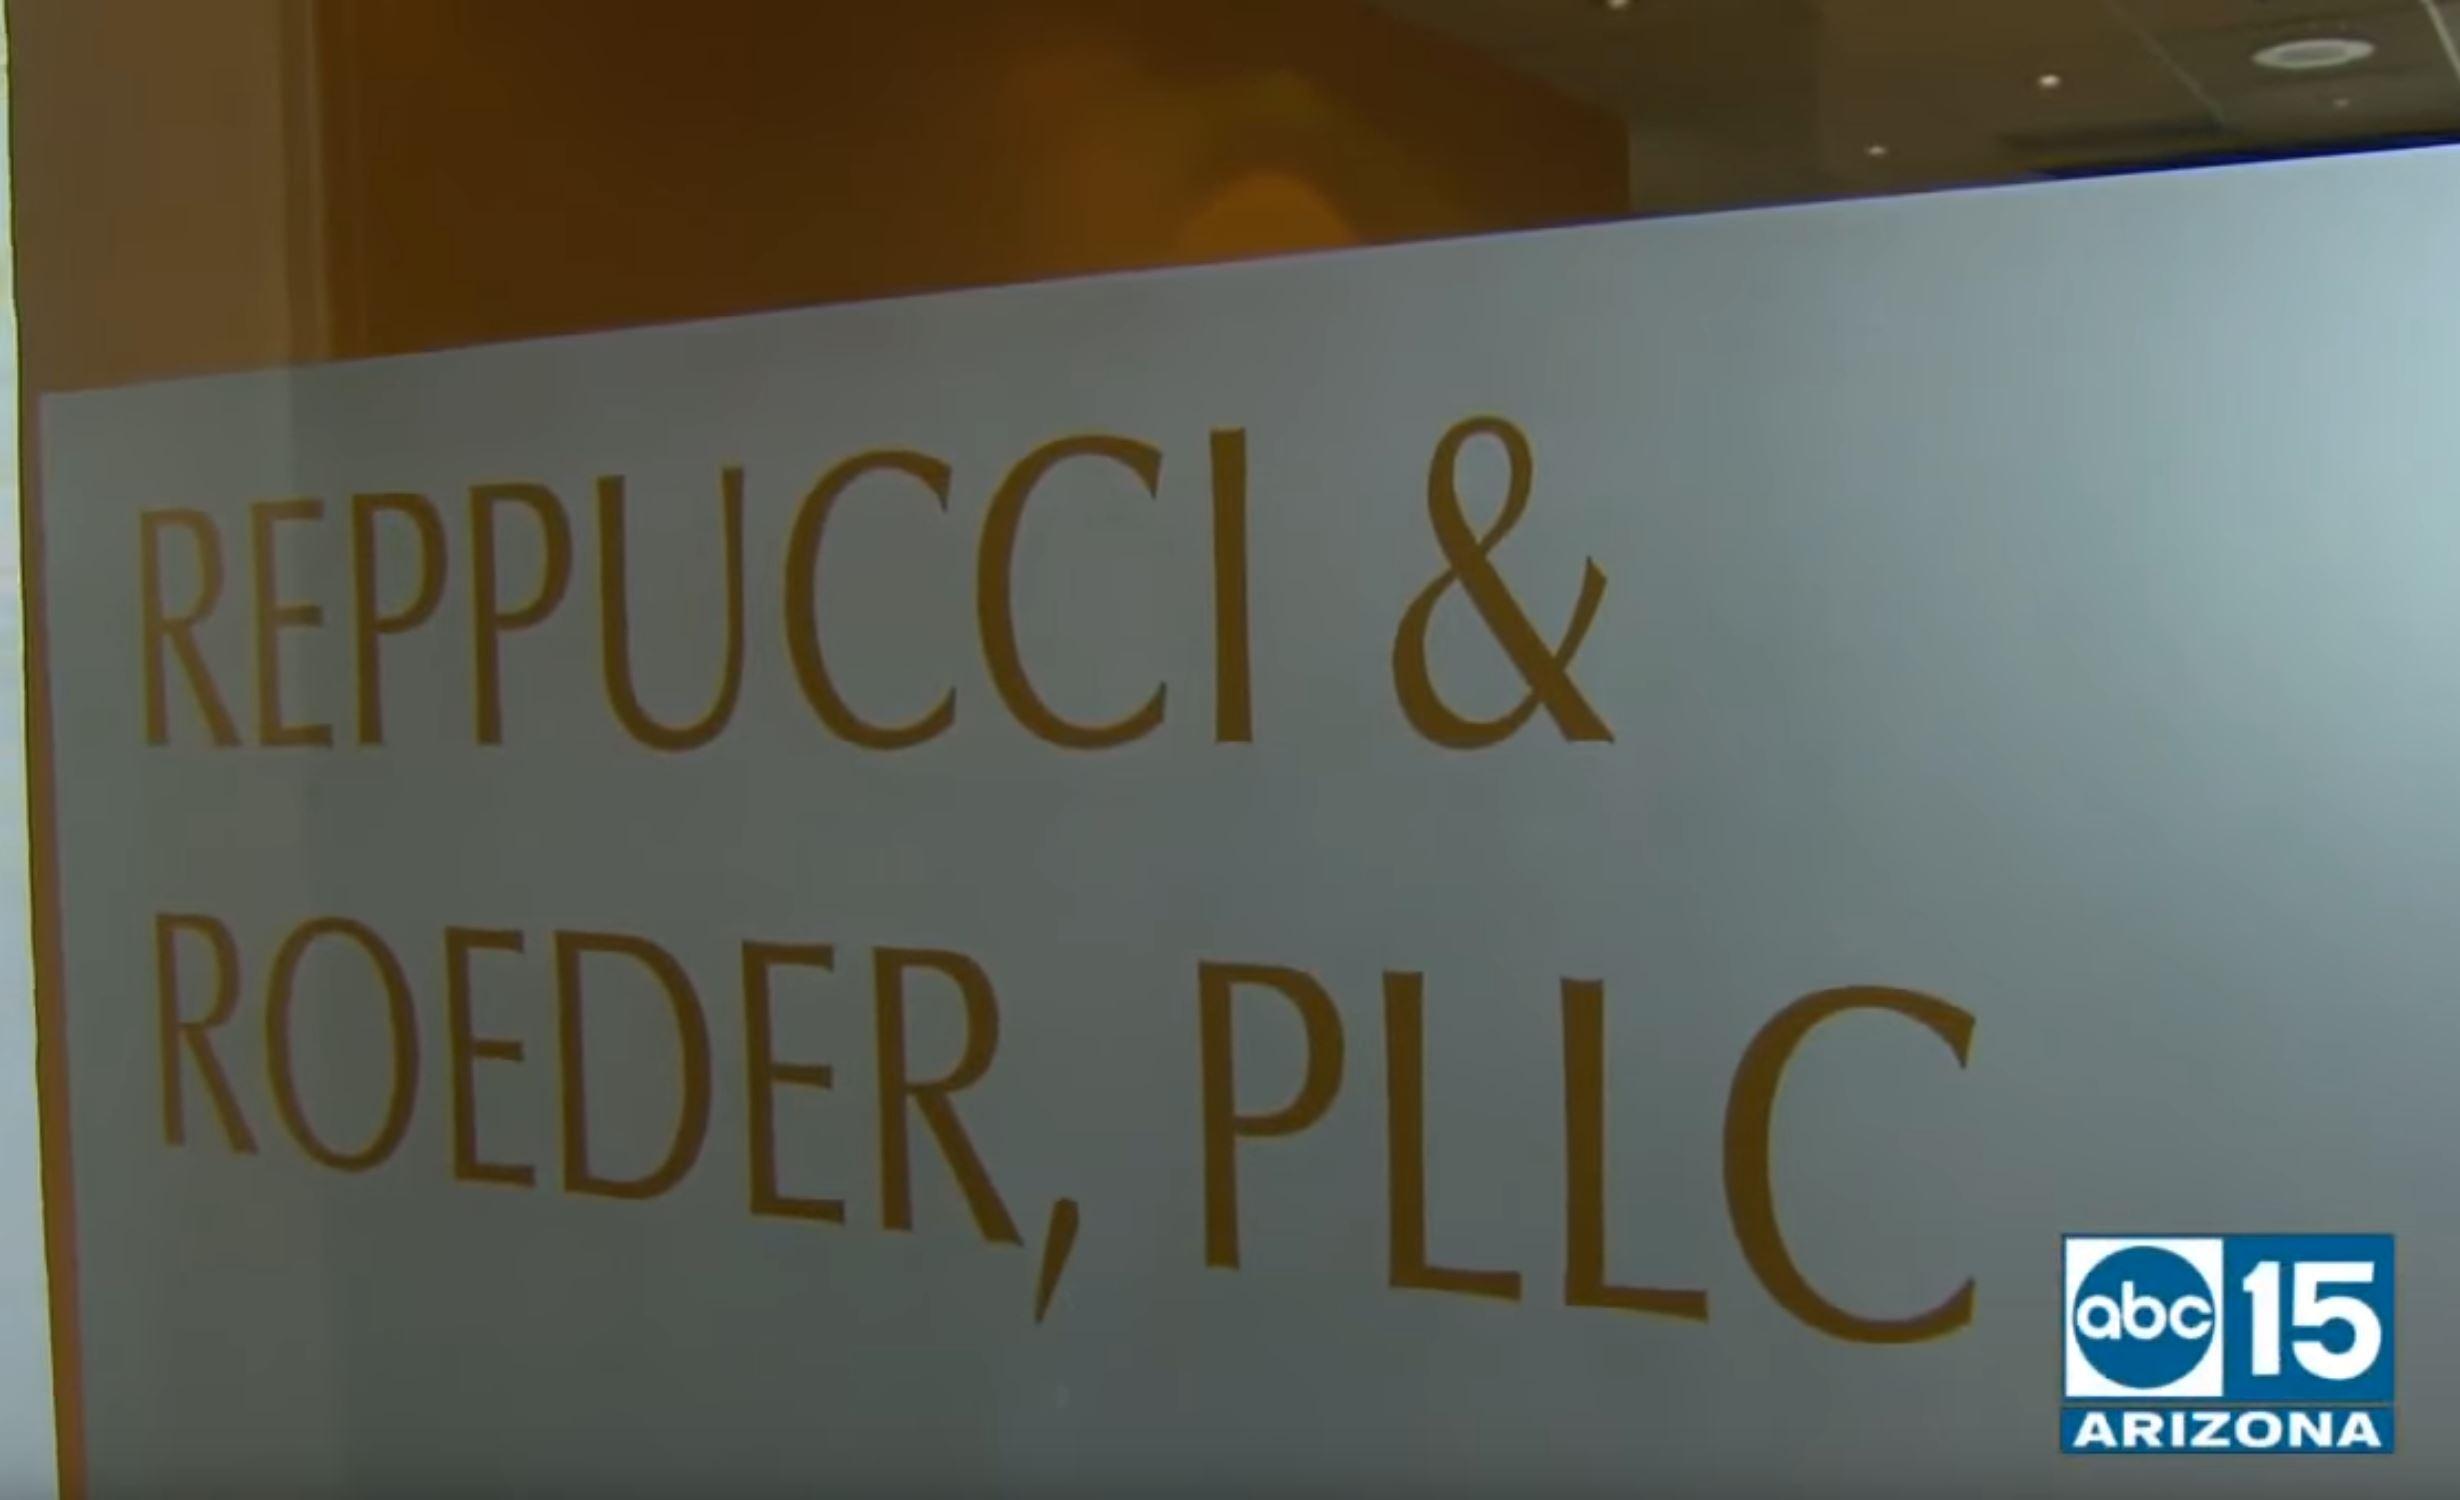 Why choose Reppucci & Roeder for family law